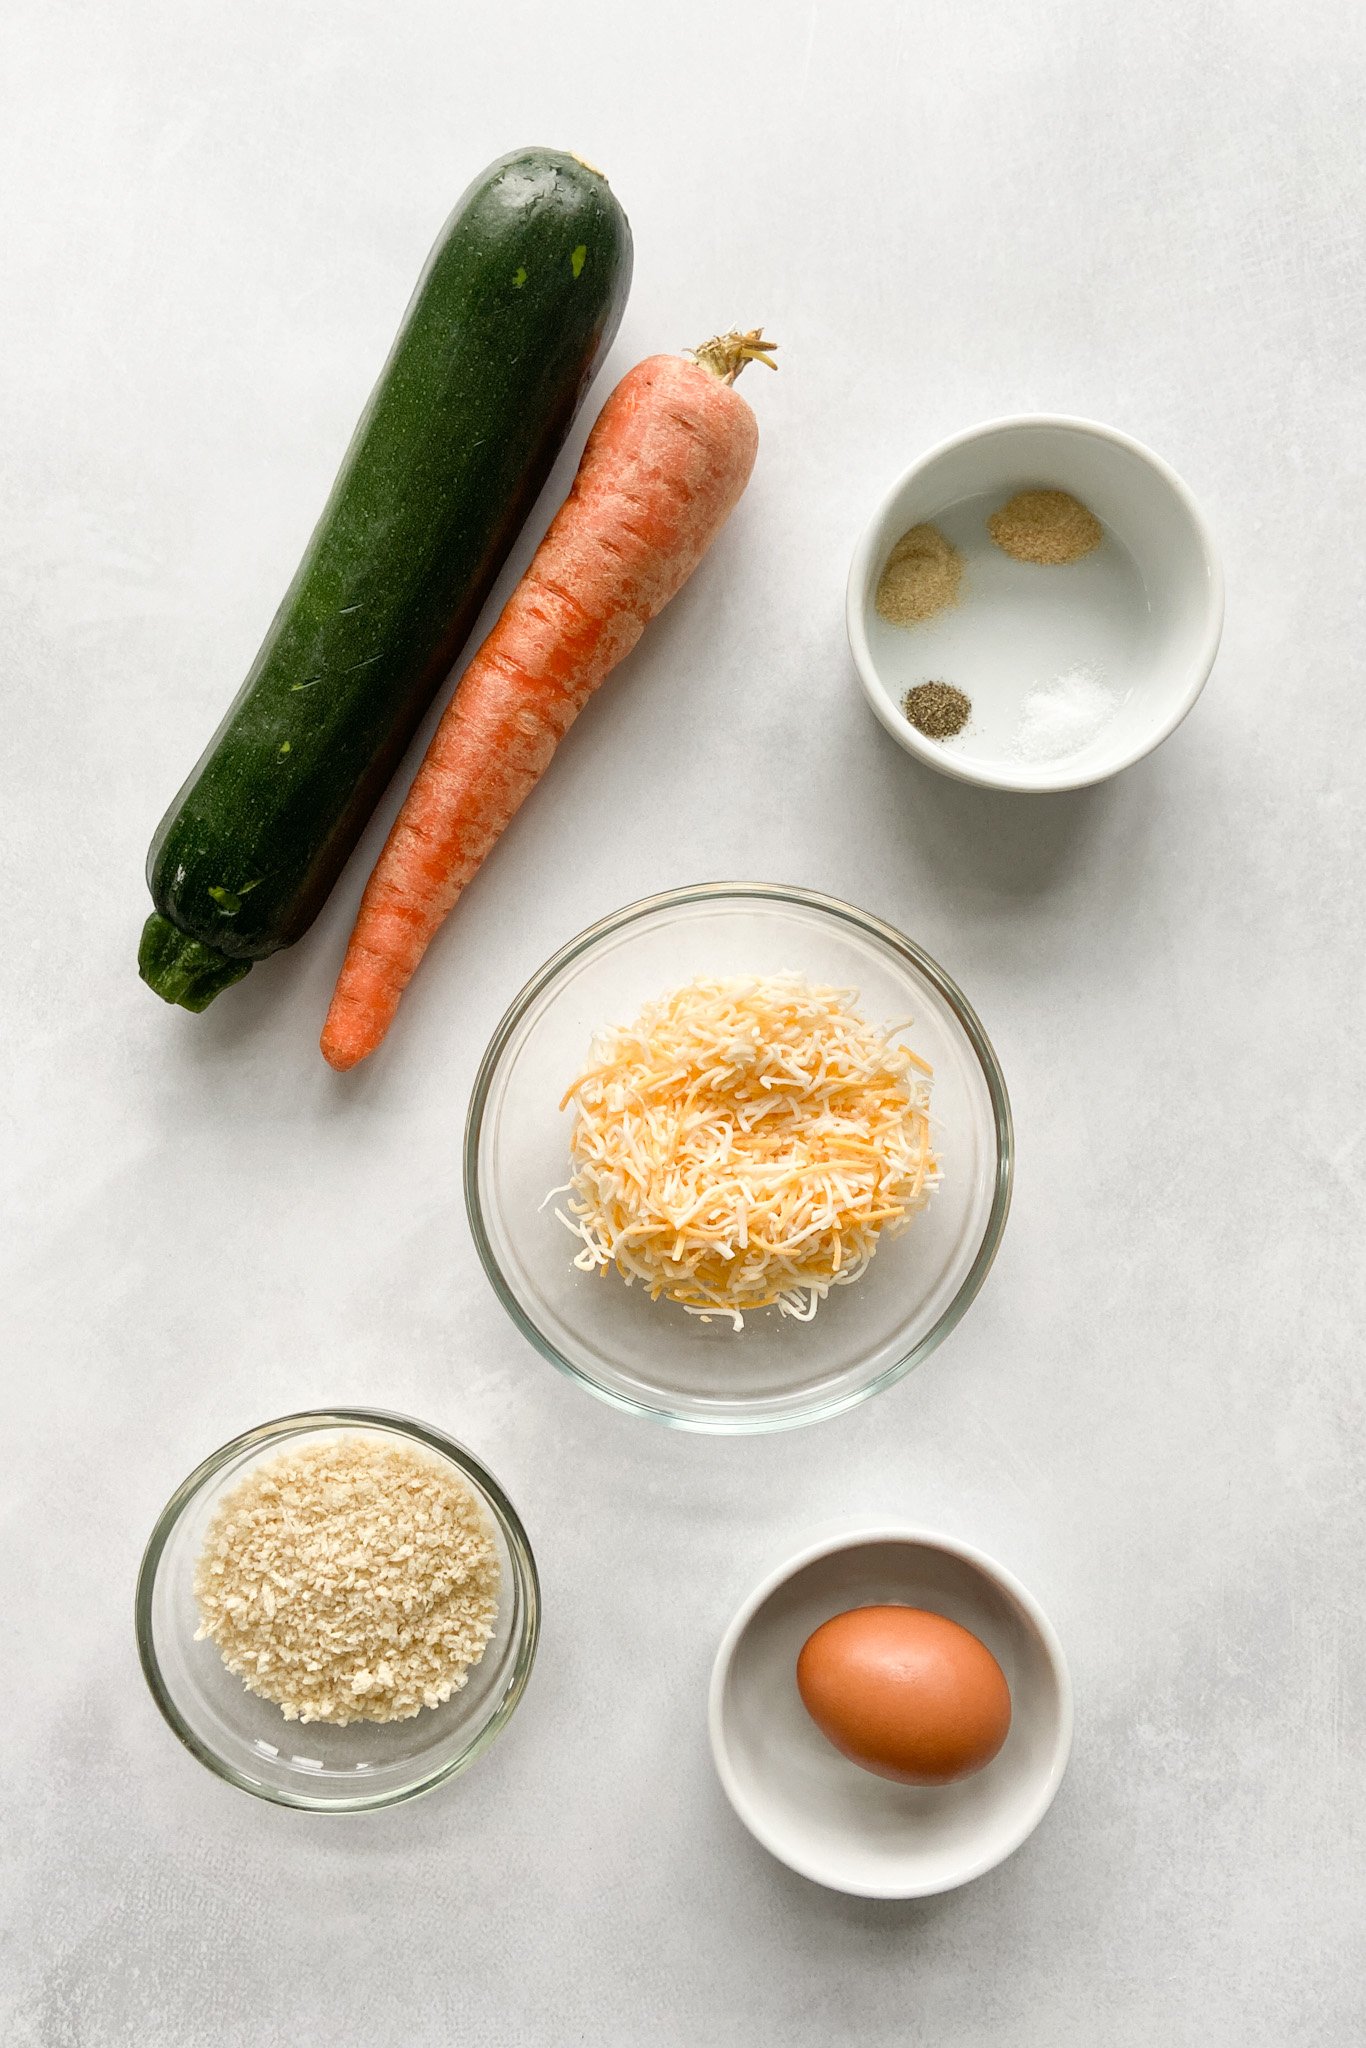 Ingredients to make zucchini carrot tots